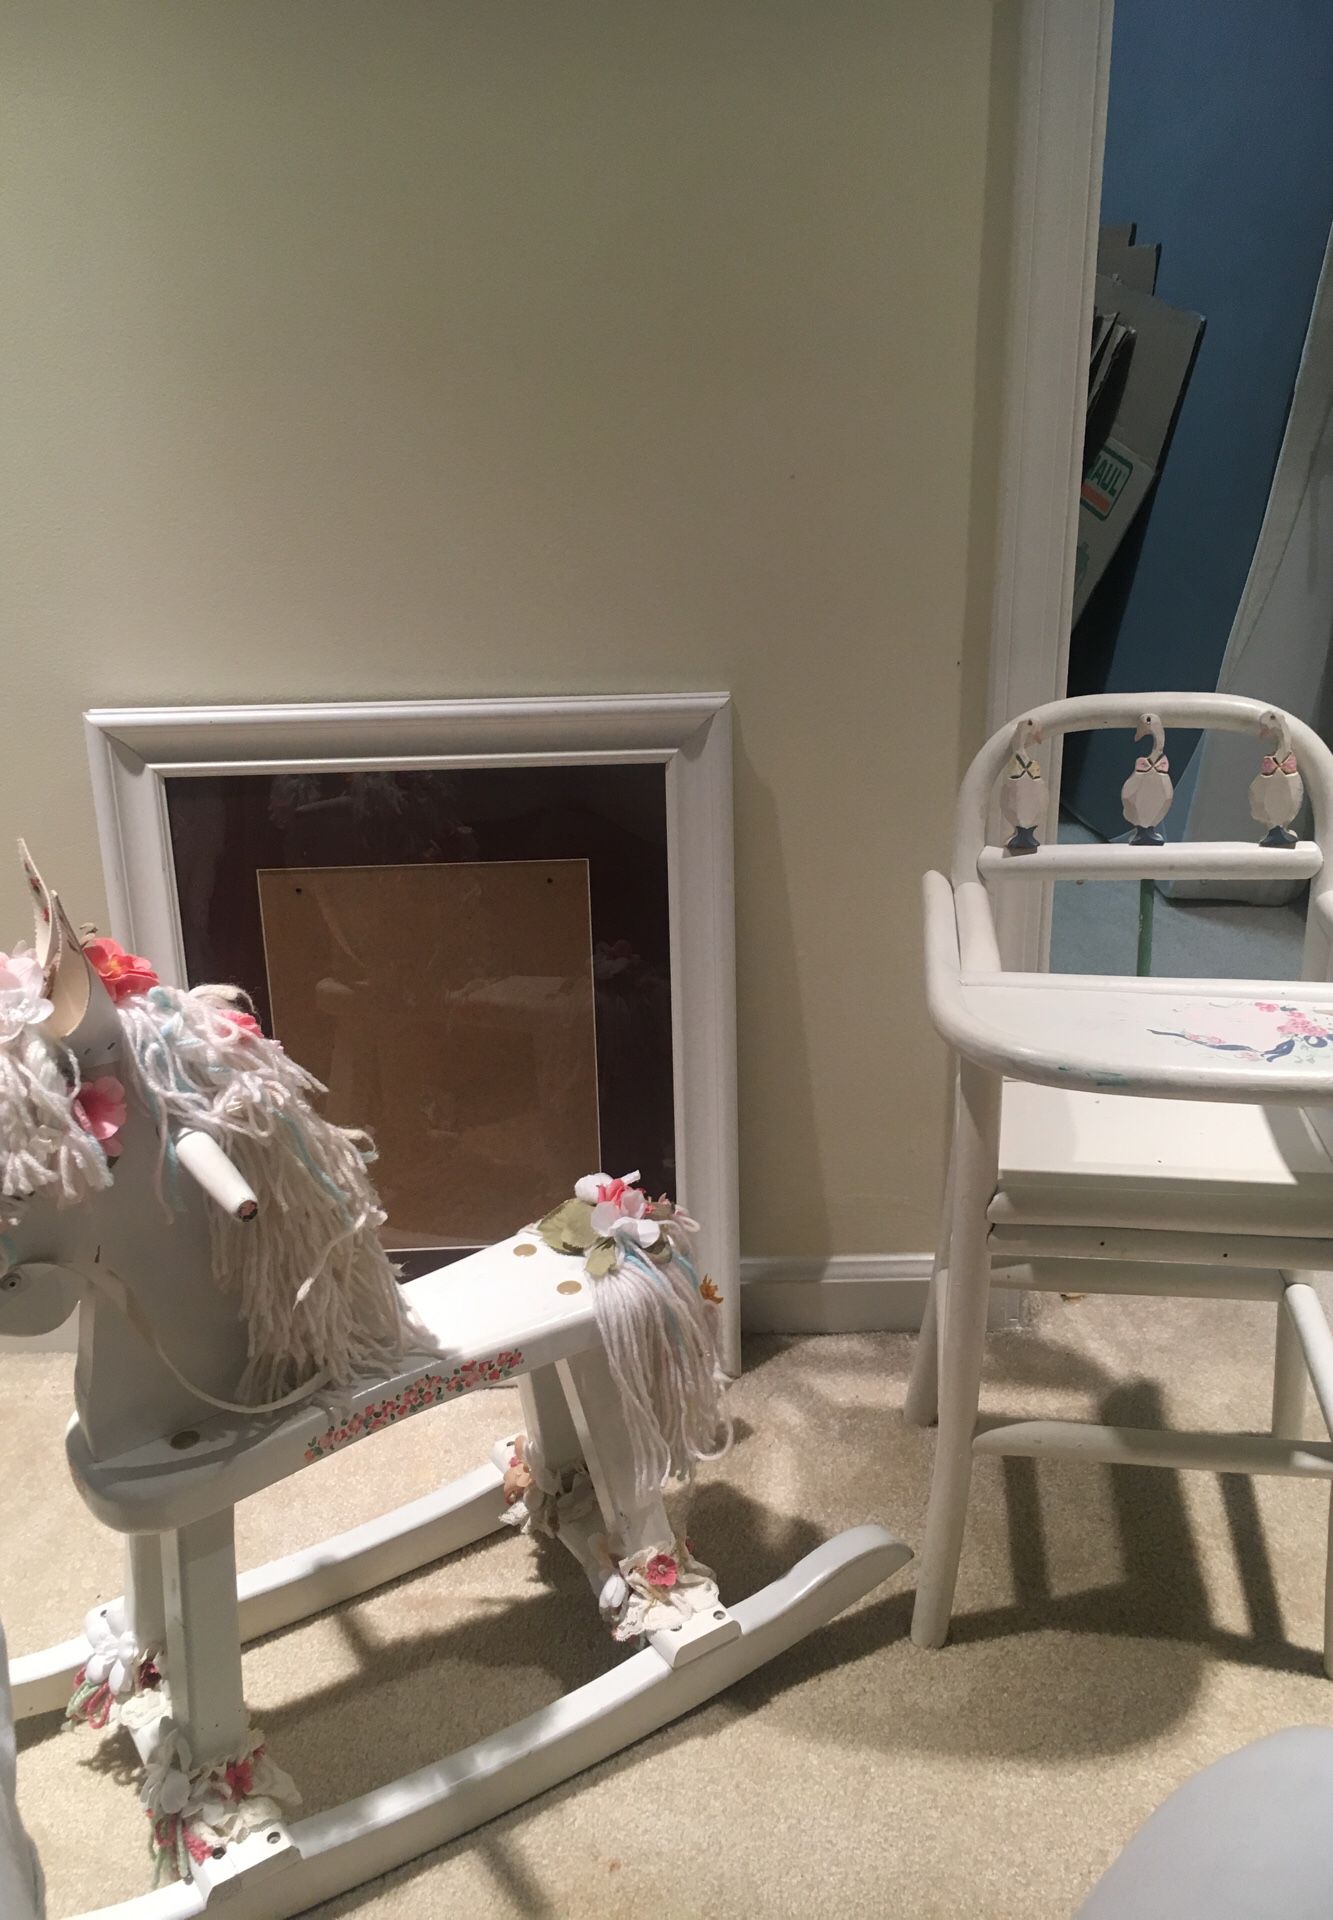 Rocking horse and white frame